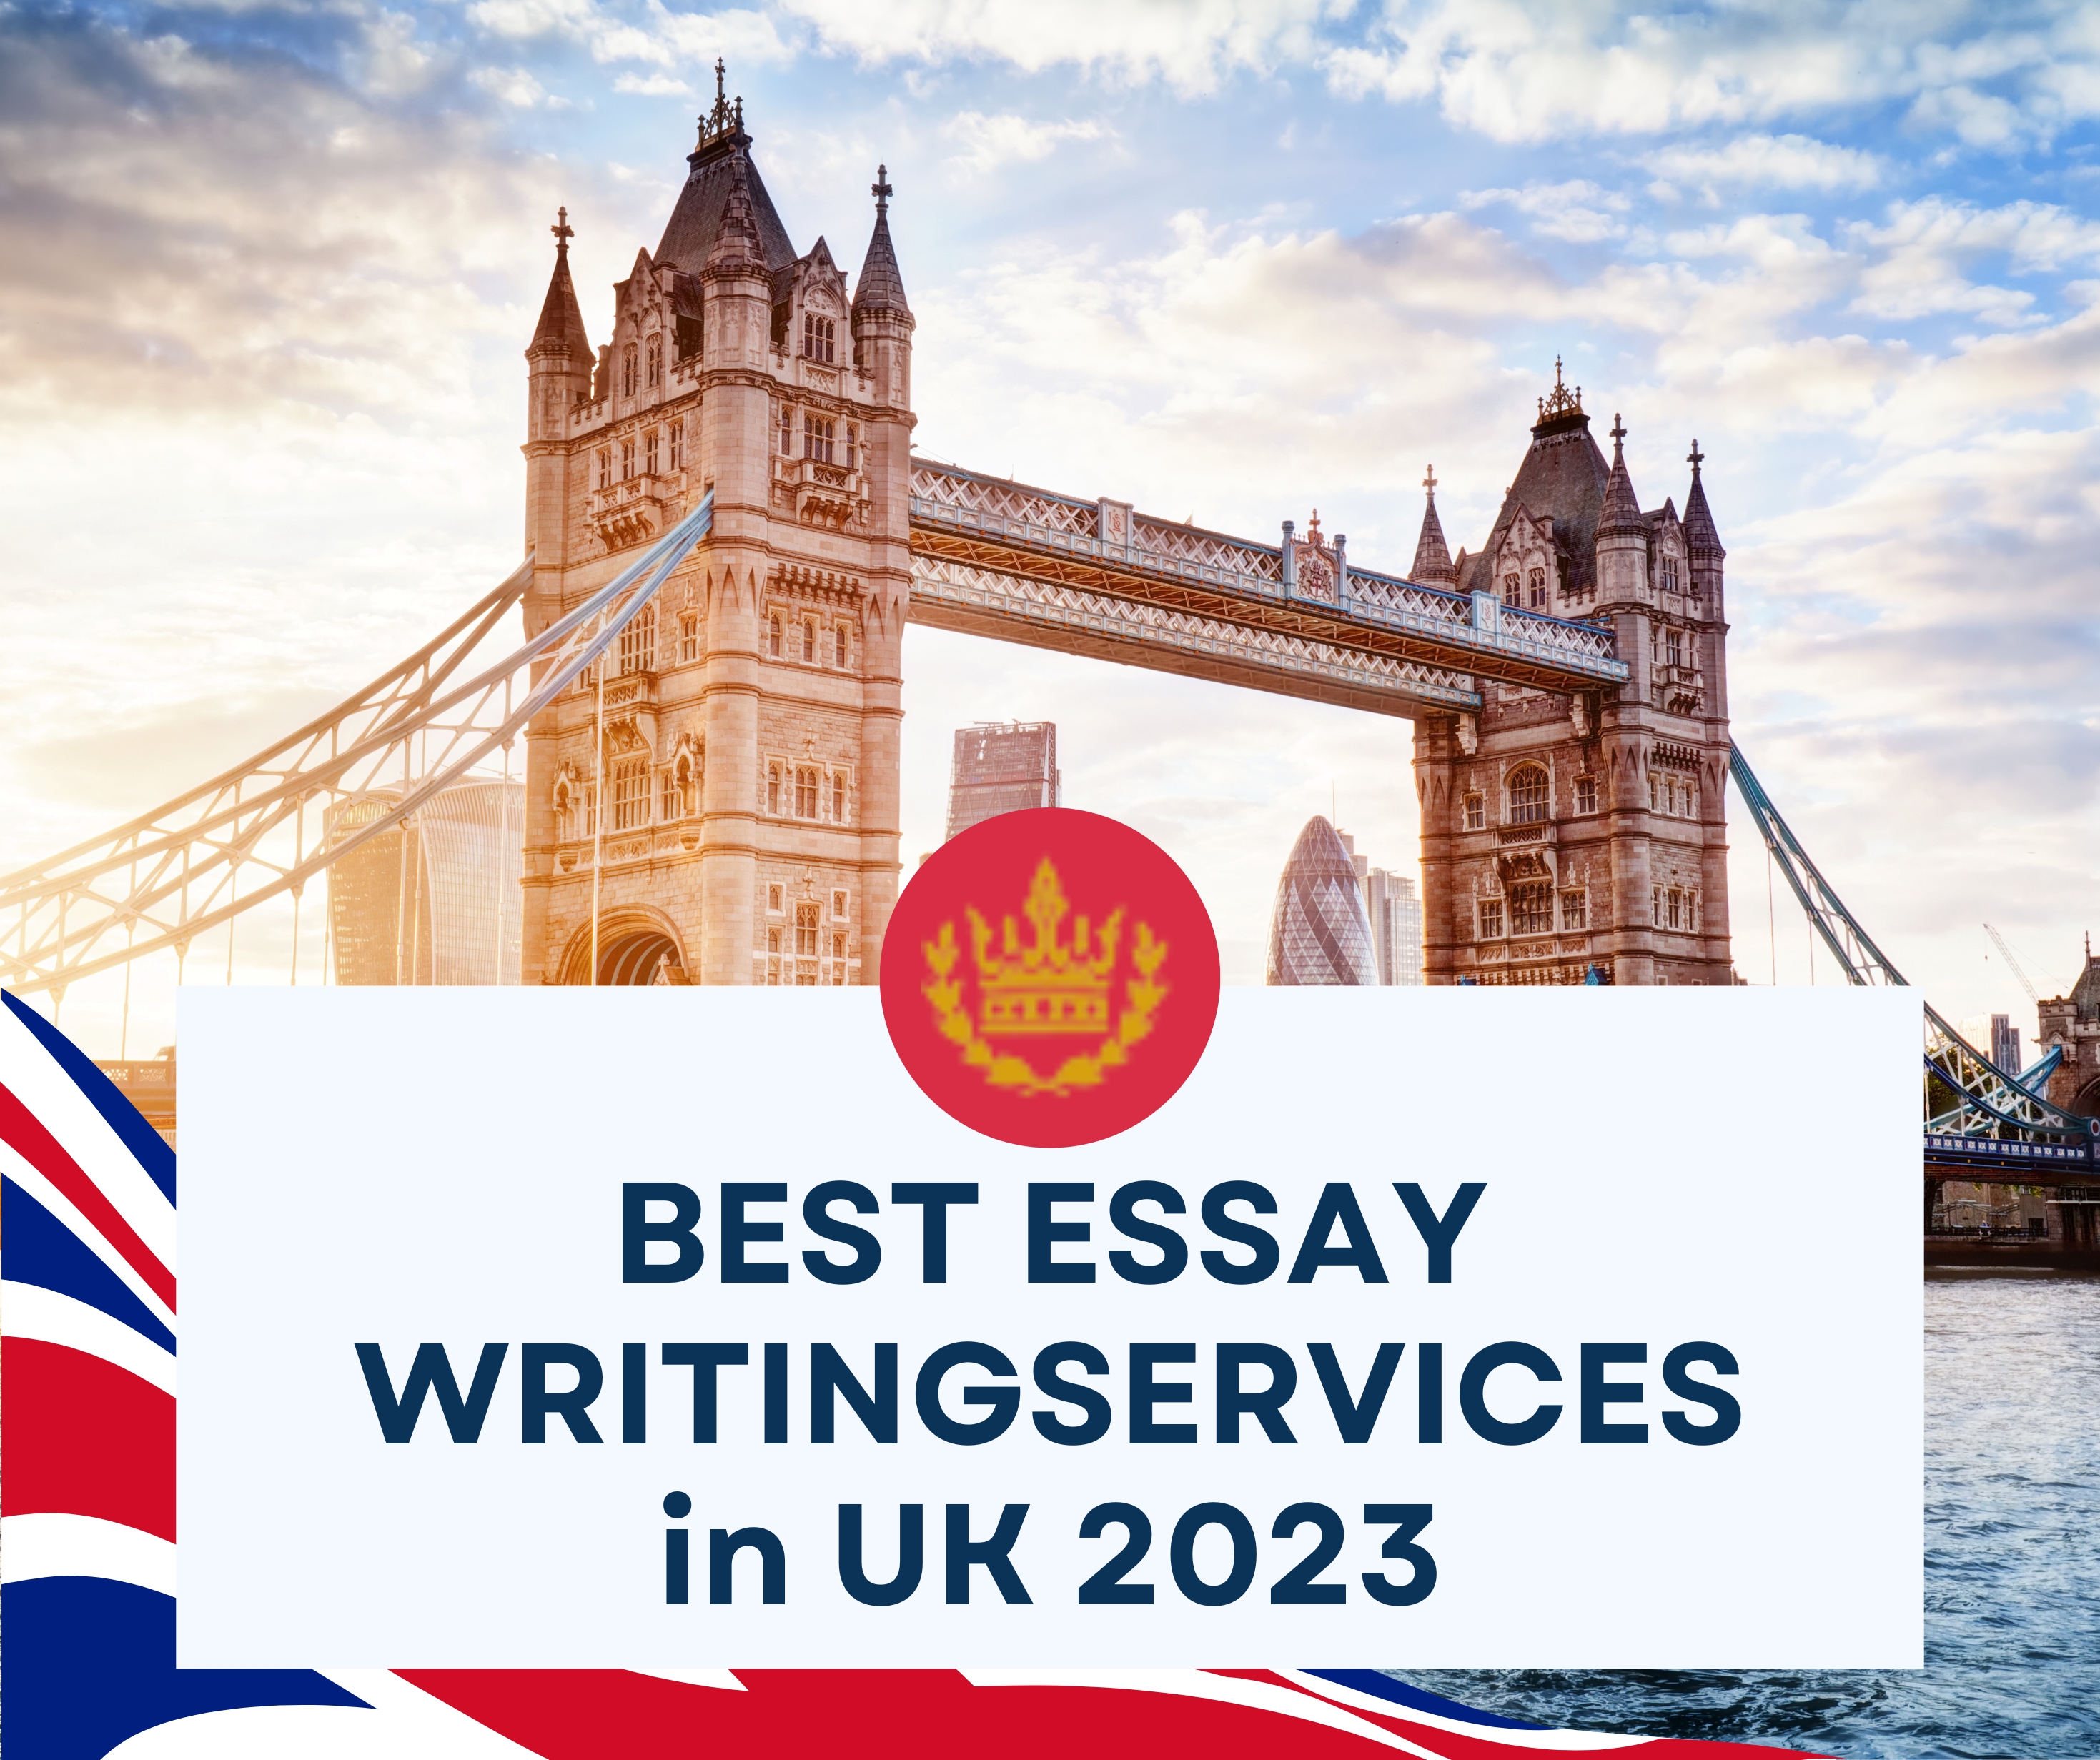 best essay writing services 2023 UK - updated